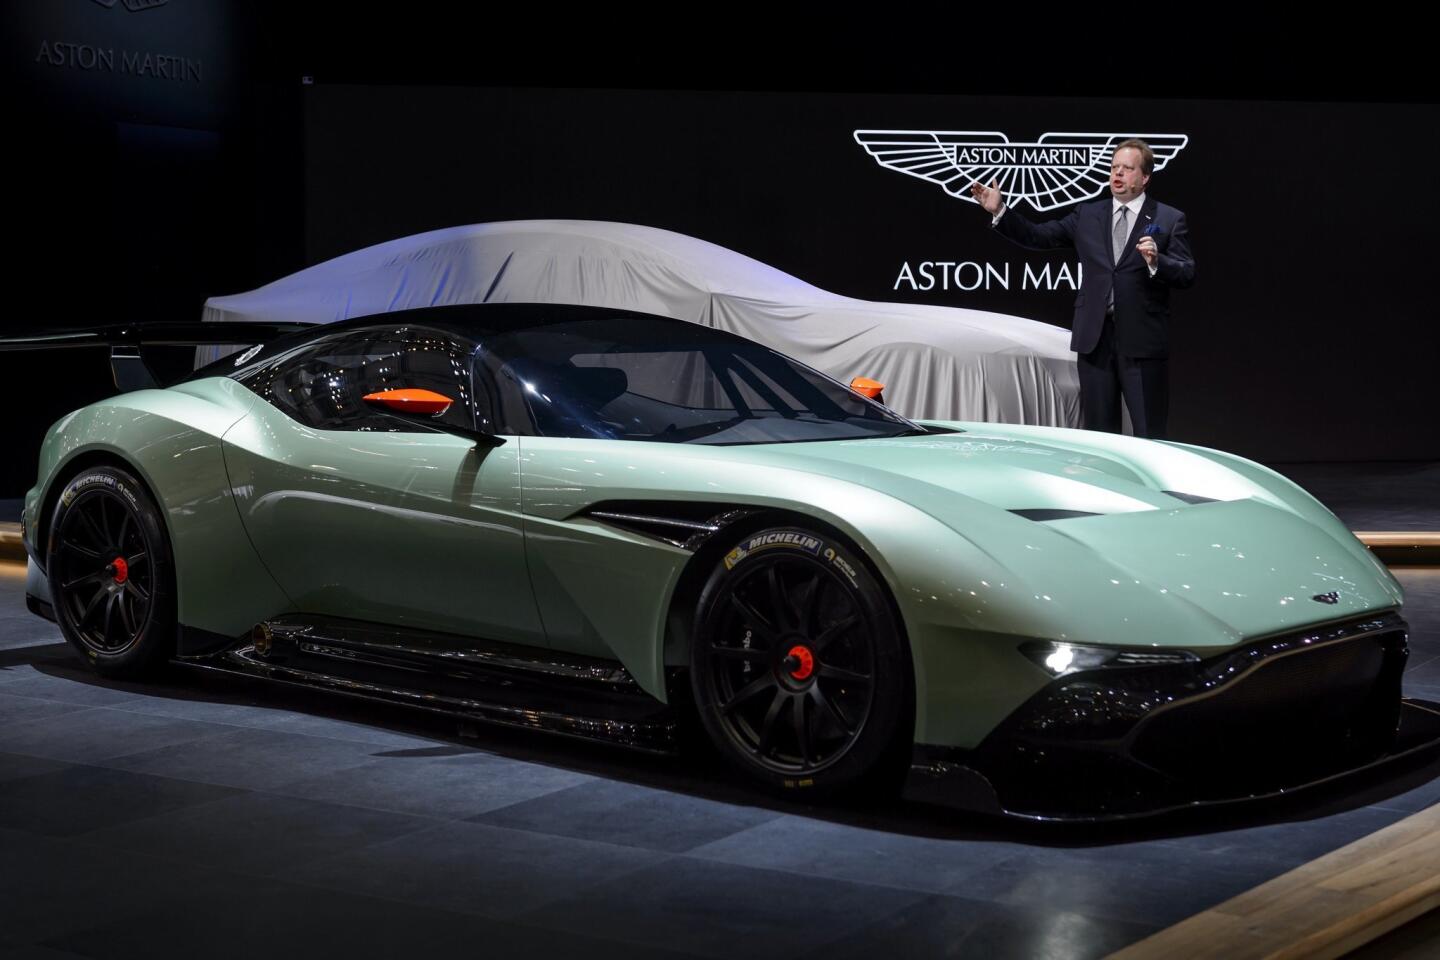 Aston Martin CEO Andy Palmer unveils the new Aston Martin Vulcan model on March 3 at the Geneva Auto Show.